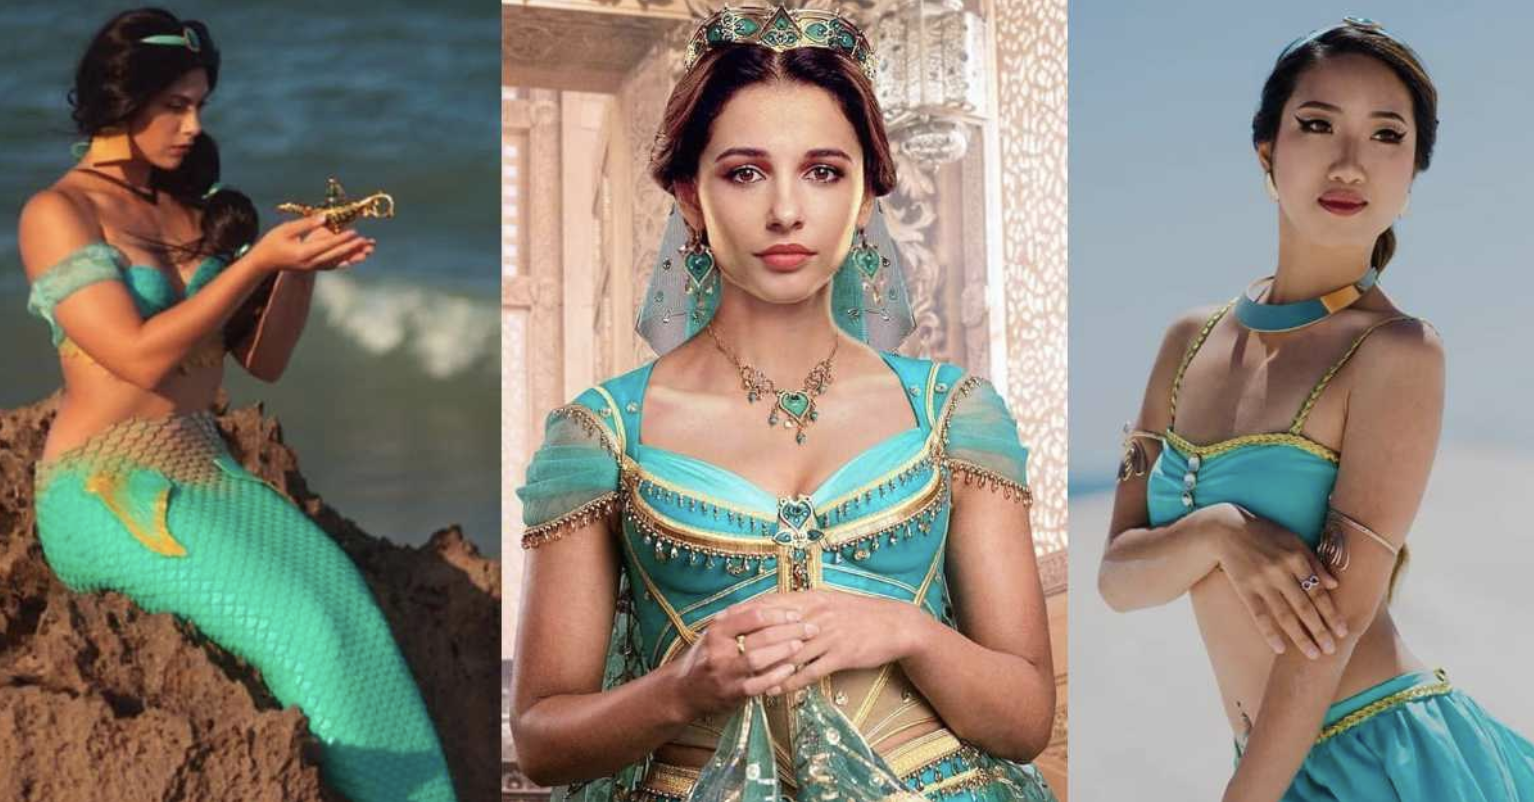 Amazing Cosplays Of Princess Jasmine That You Will Surely Admire